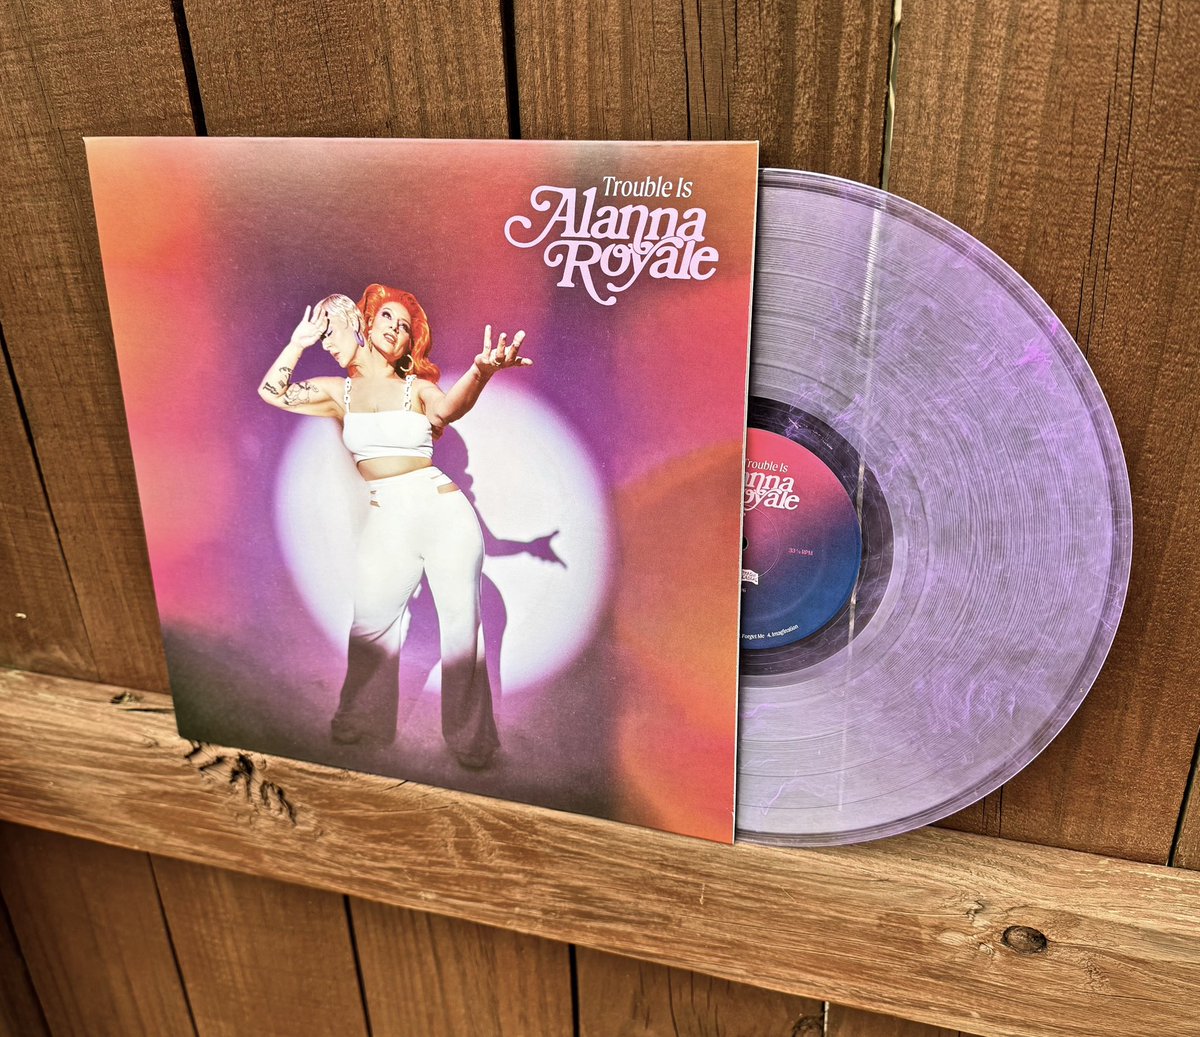 These leftover LTD/100 Purple Smoke vinyl are up in our main webstore for anyone to come and grab! It’s #soulstepsunday and you should treat yourself with one of the special “Trouble Is” vinyl from @alannaroyale Go ahead, get to our site, and hit ADD TO CART!